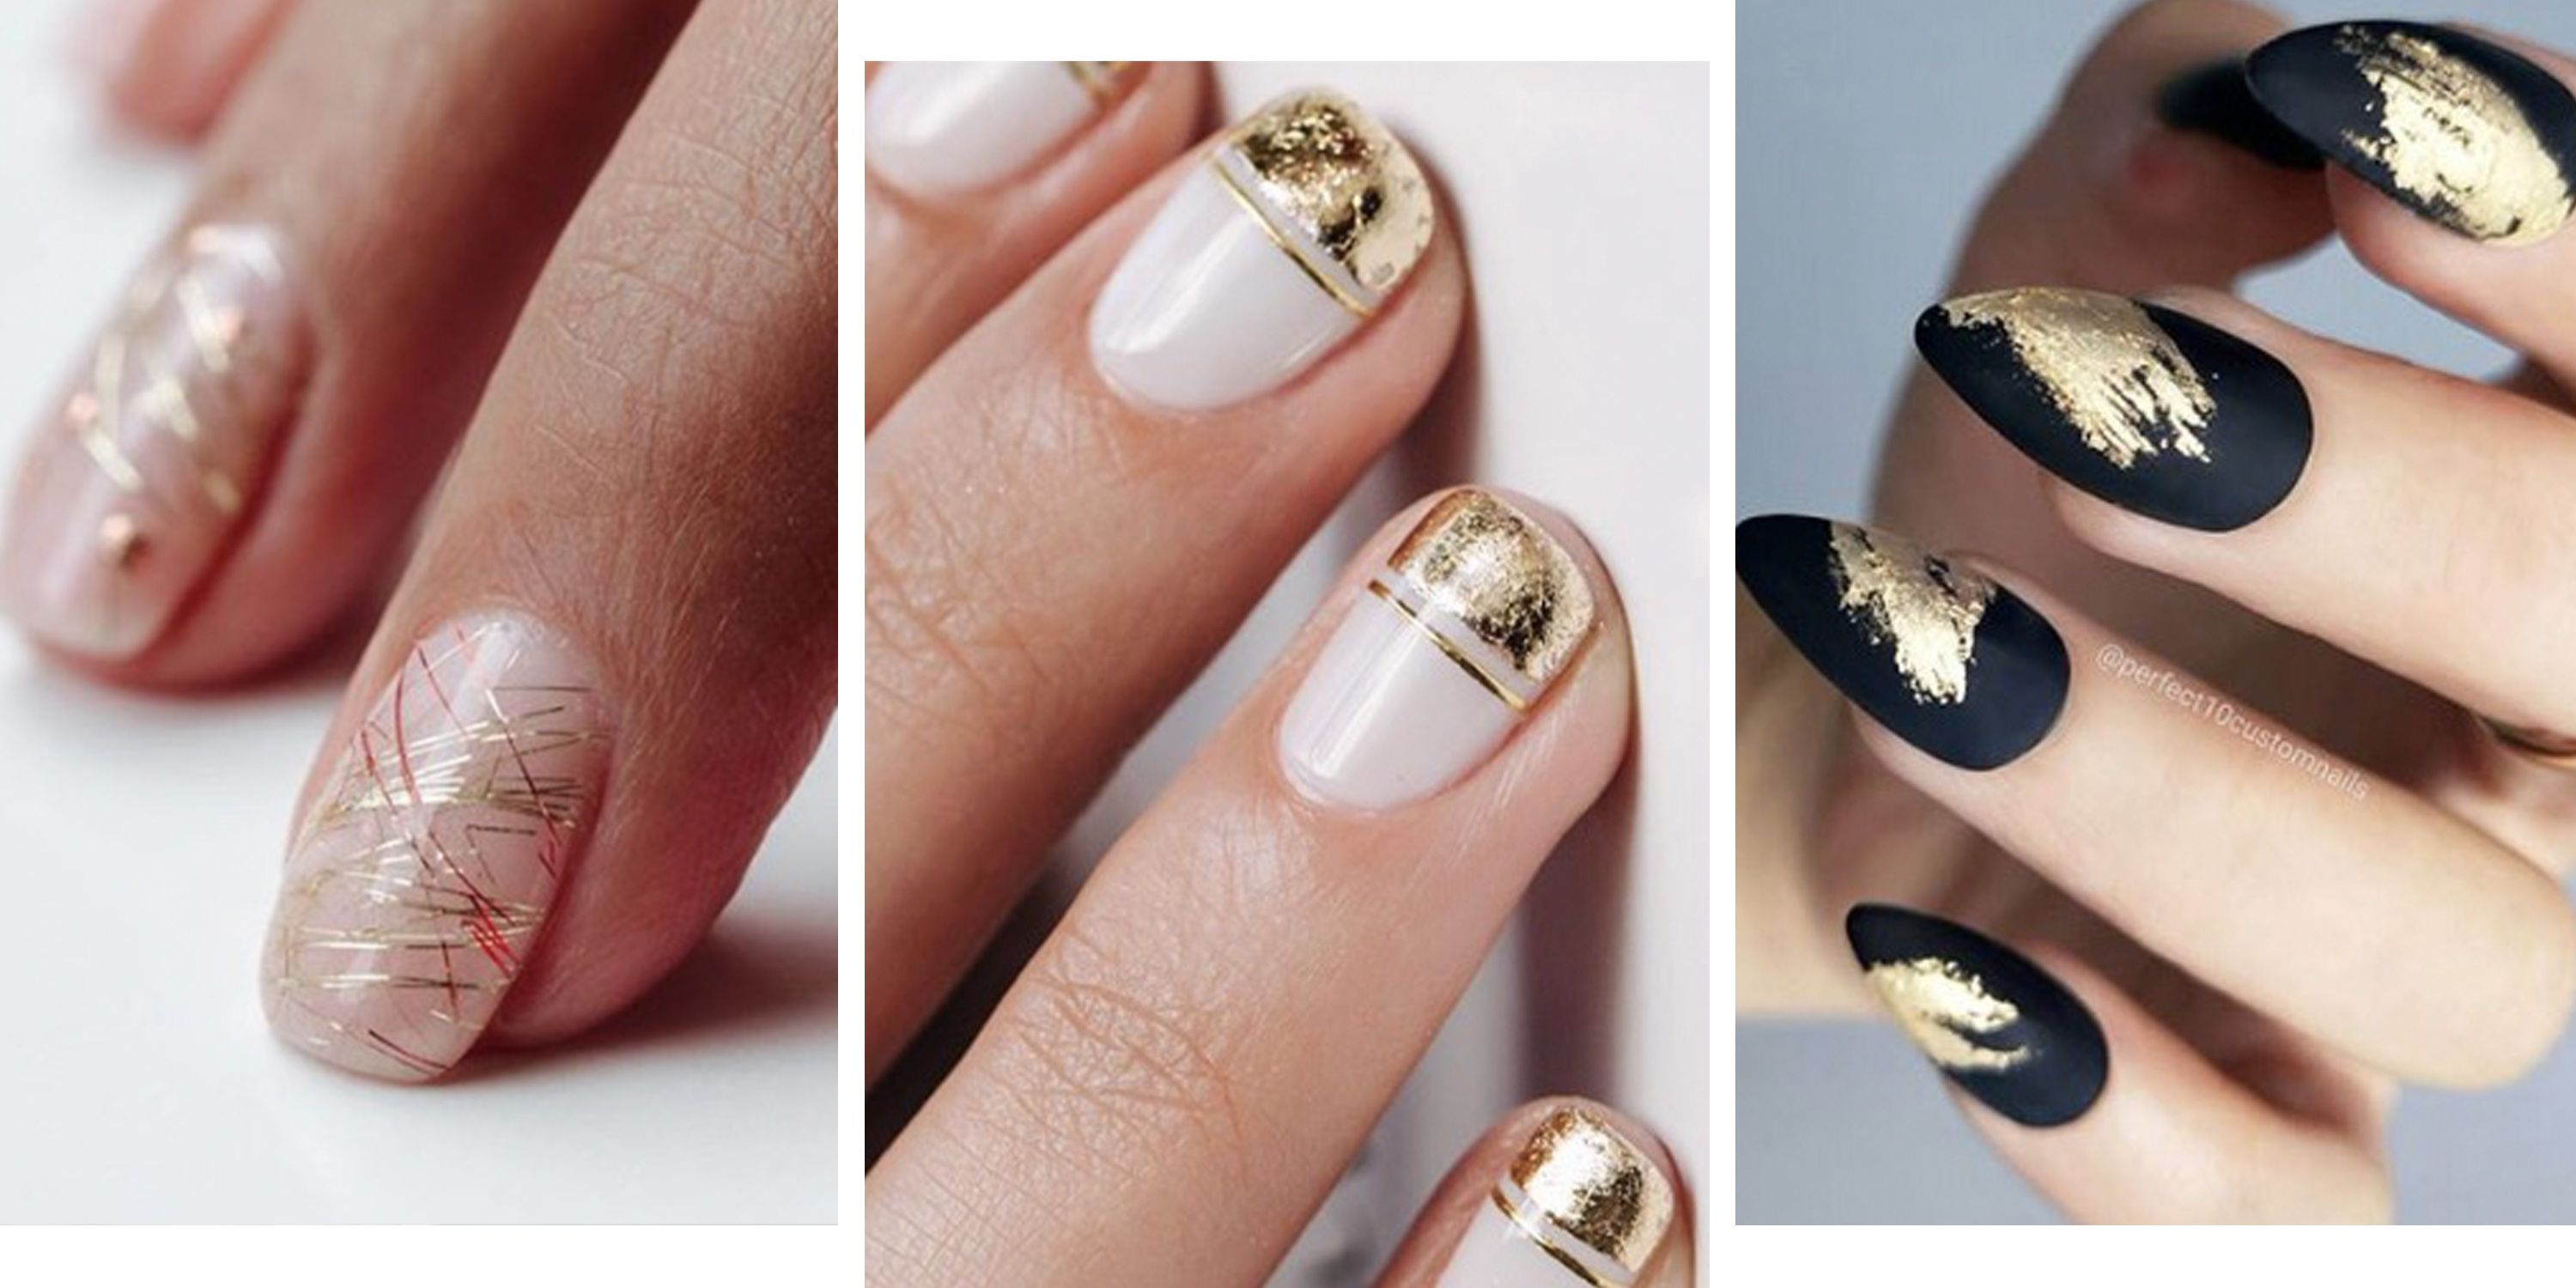 2. Cute Black and Gold Nail Art - wide 6